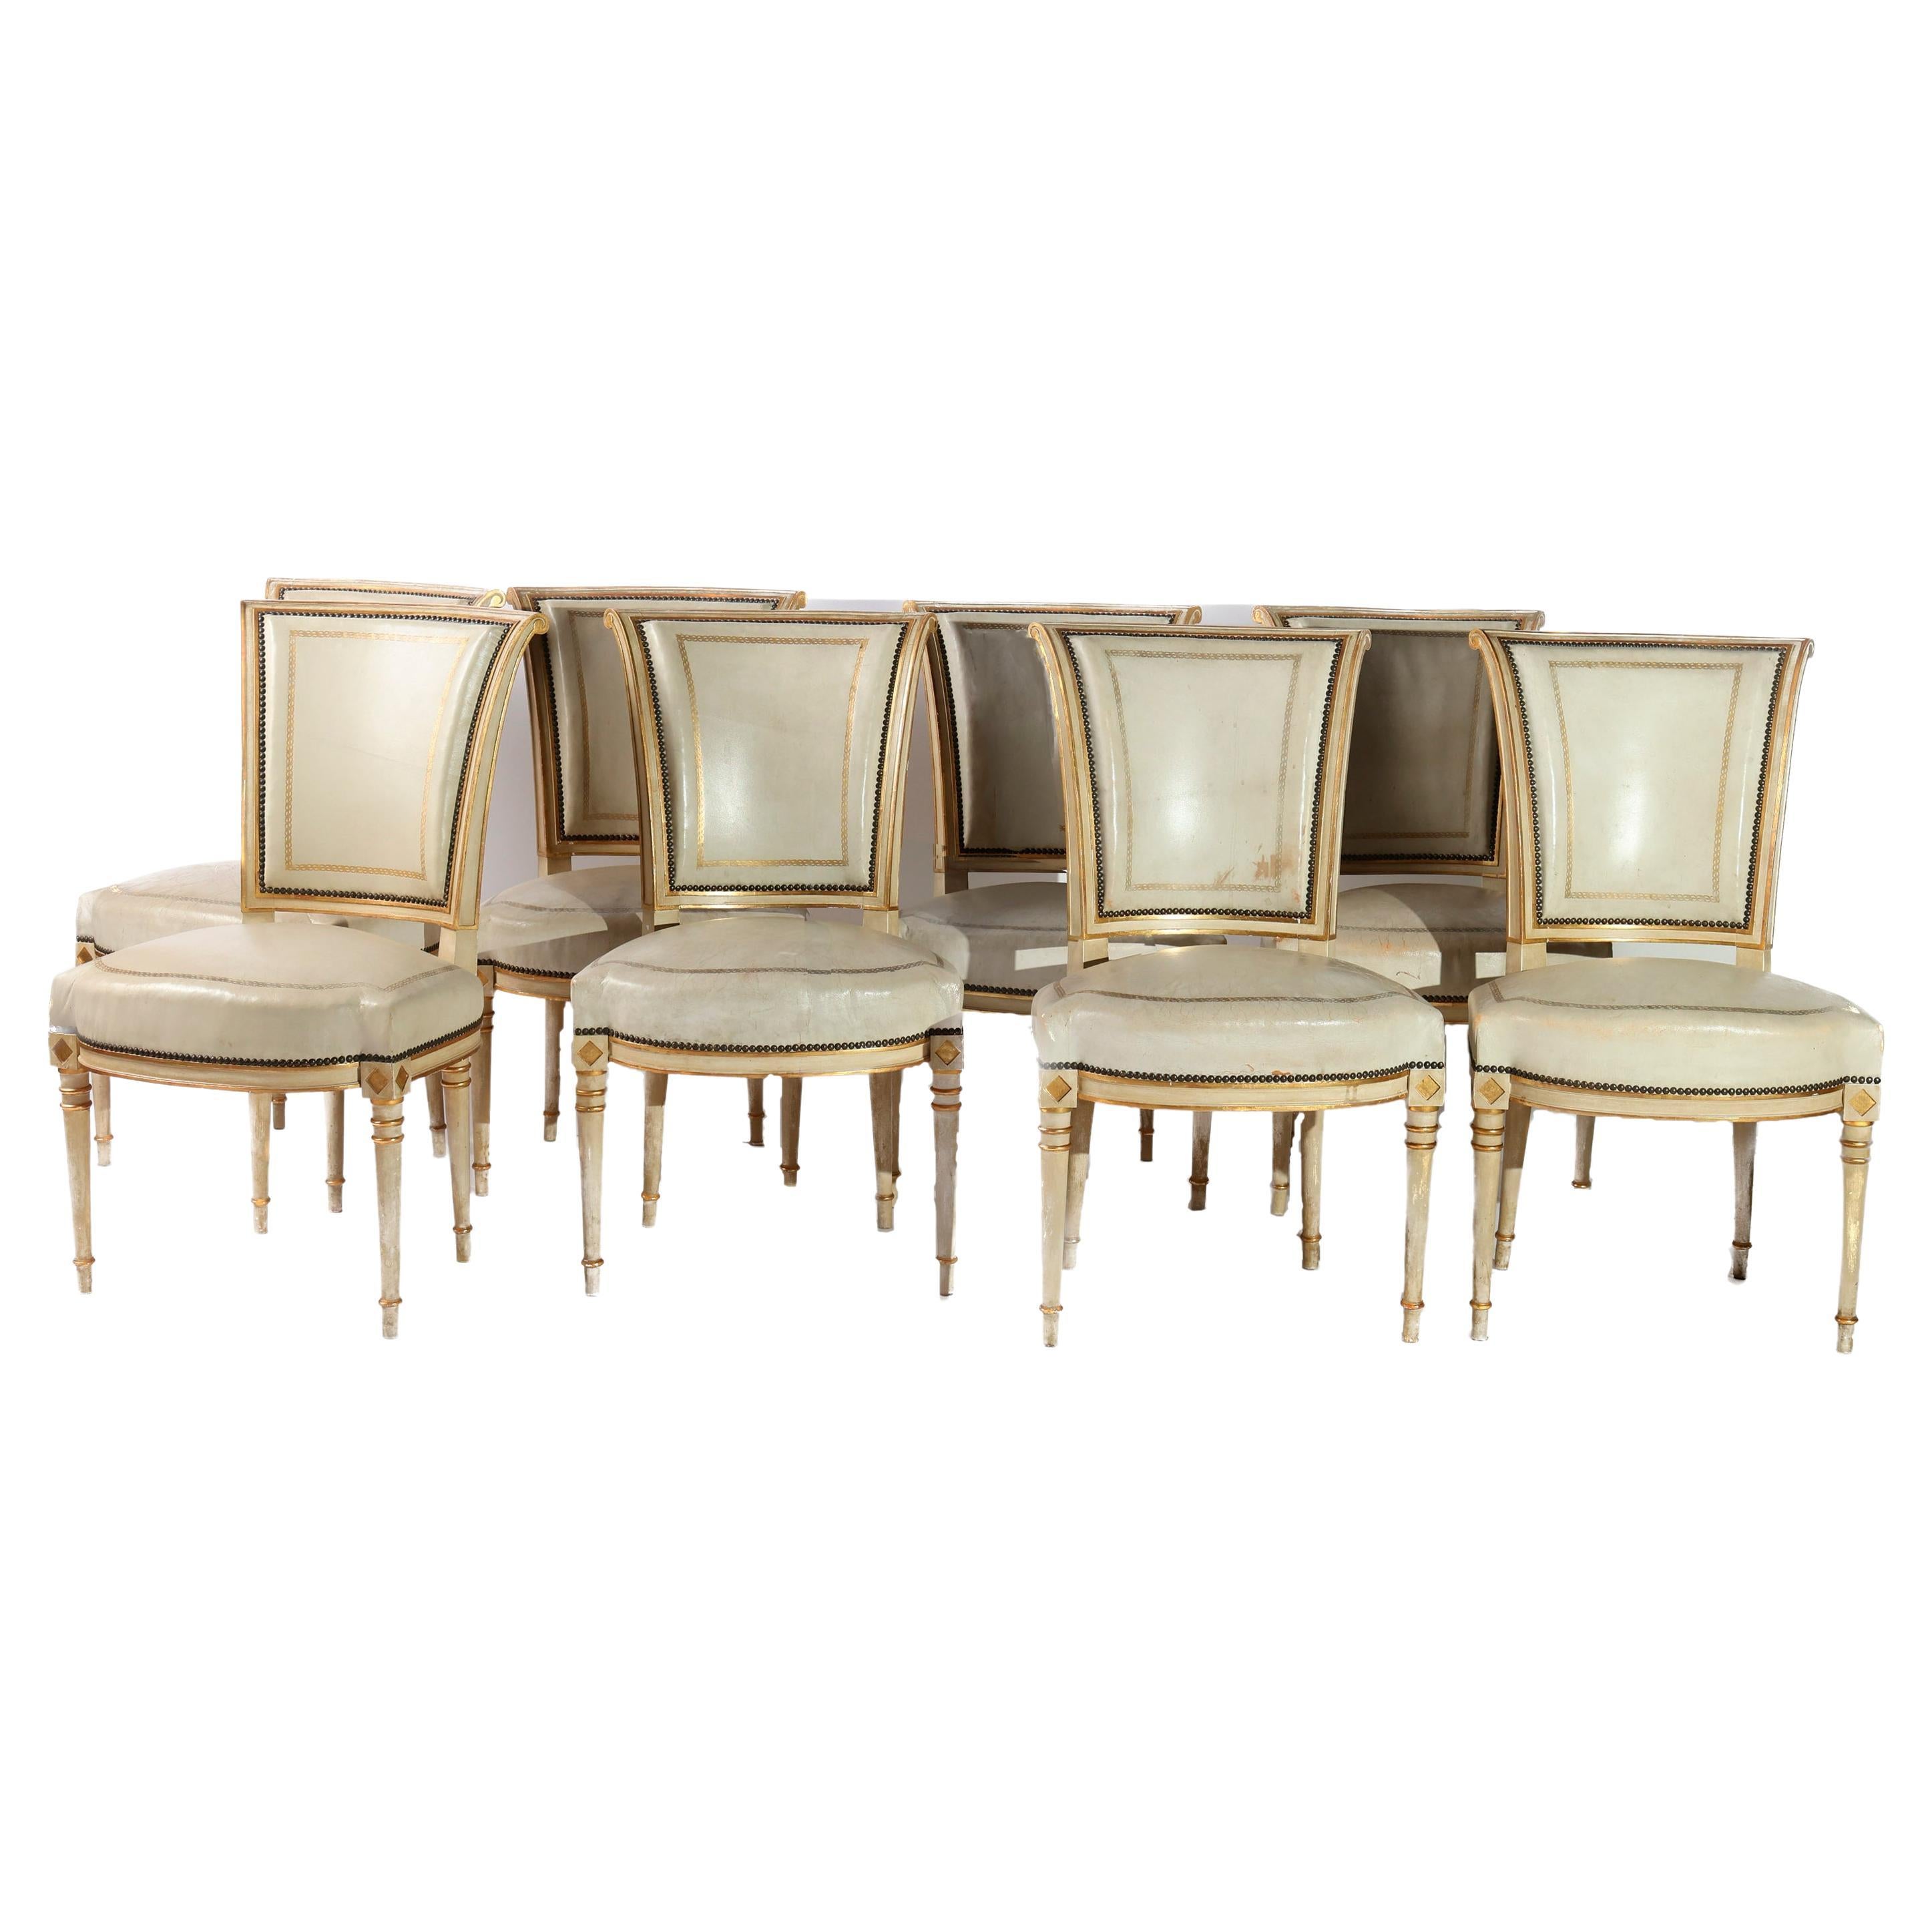 Set of 8 Maison Jansen Chairs For Sale